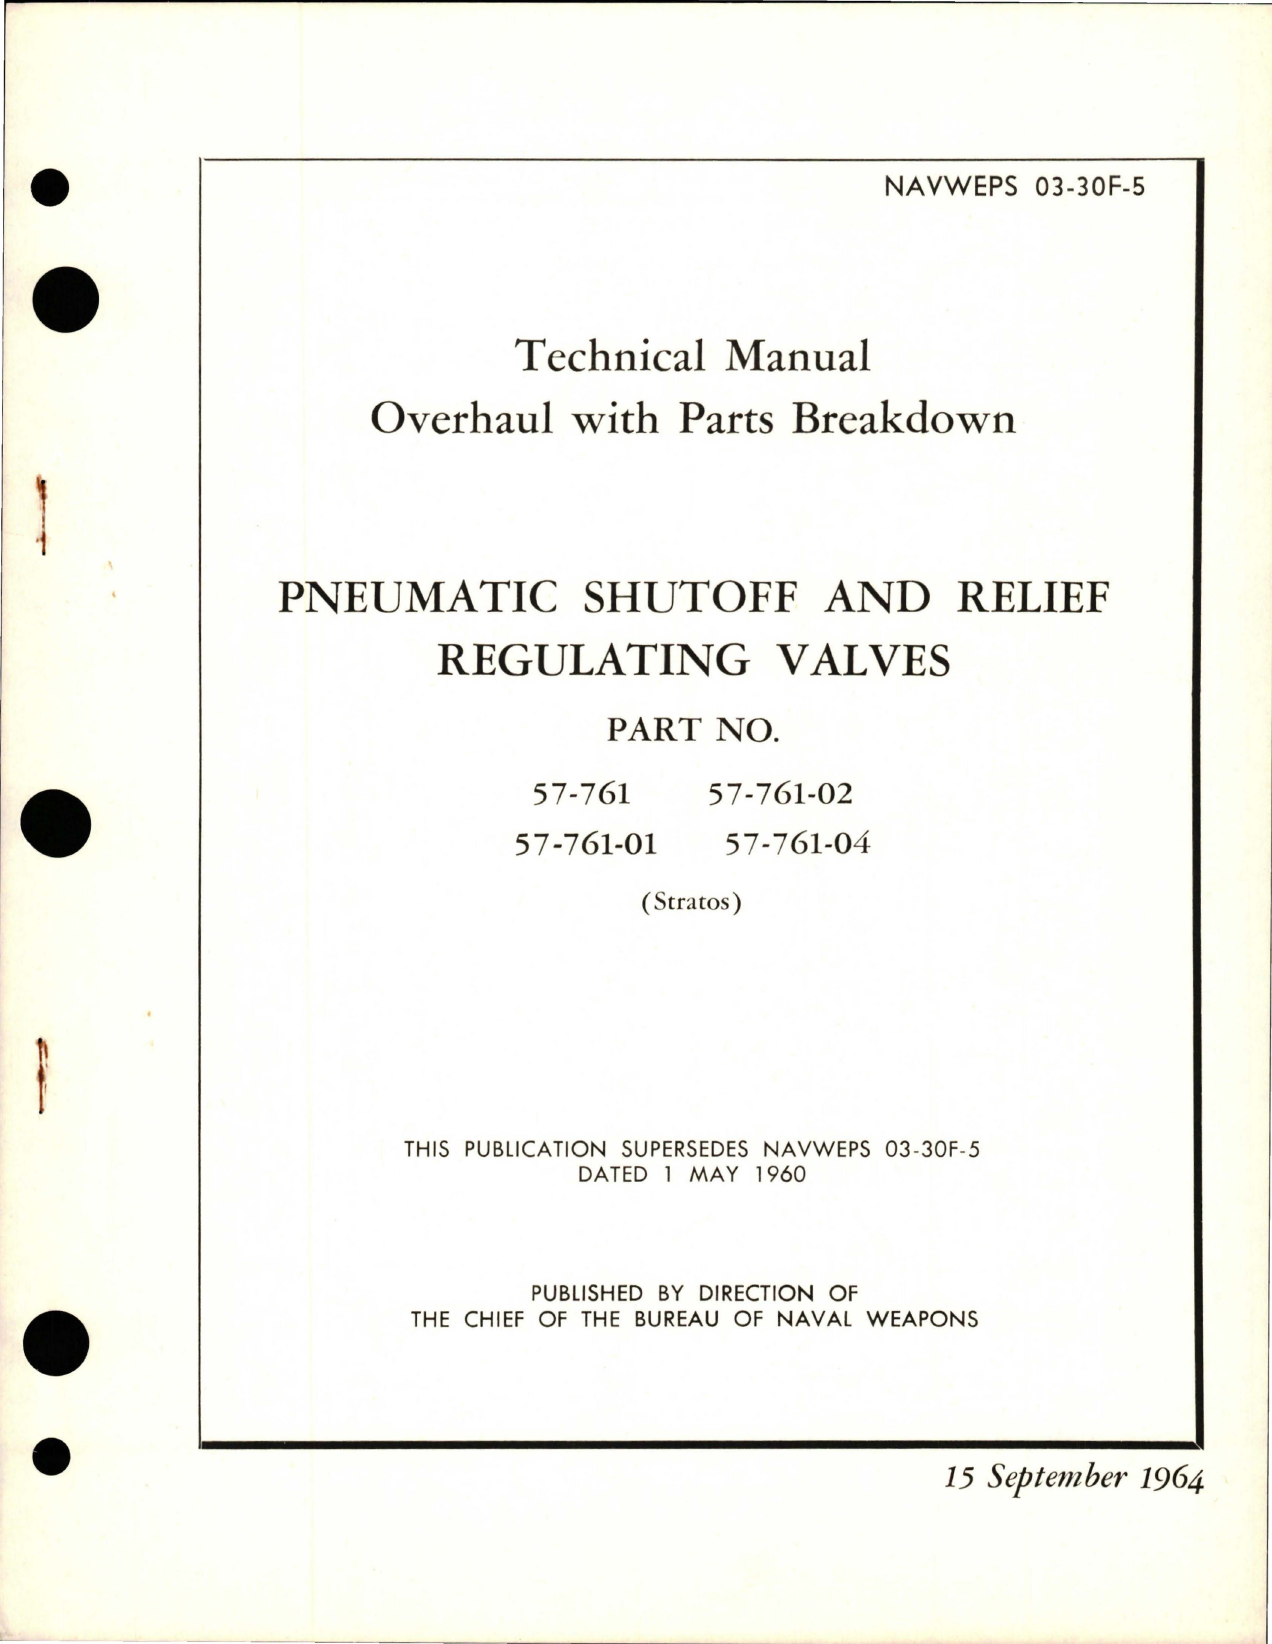 Sample page 1 from AirCorps Library document: Overhaul with Parts for Pneumatic Shutoff & Relief Regulating Valves - Parts 57-761, 57-761-01, 57-761-02, and 57-761-04